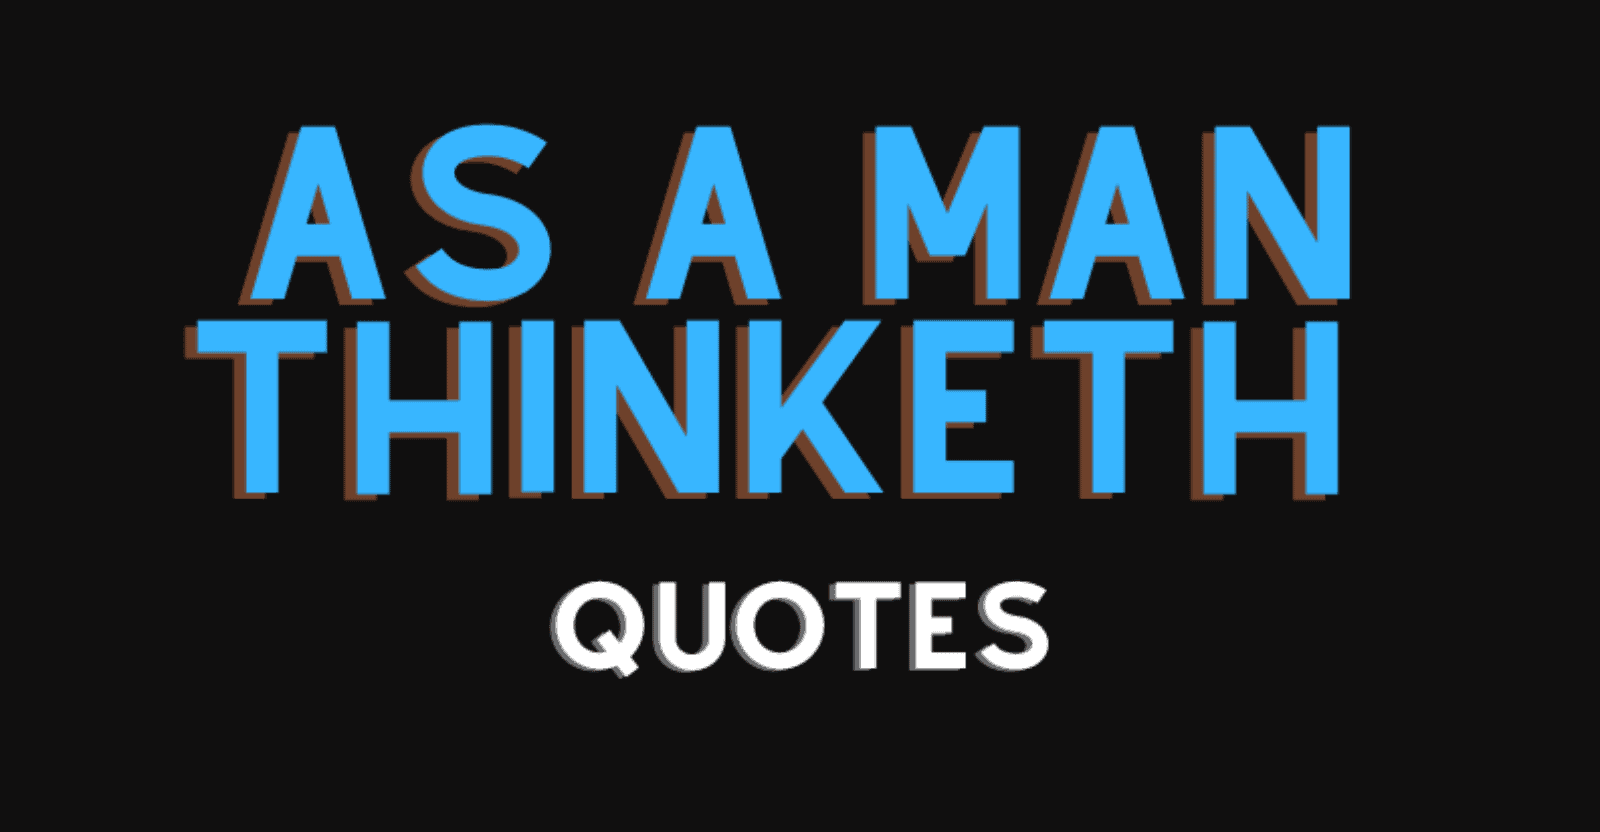 41 Most Inspiring As a Man Thinketh Quotes - AnQuotes.com